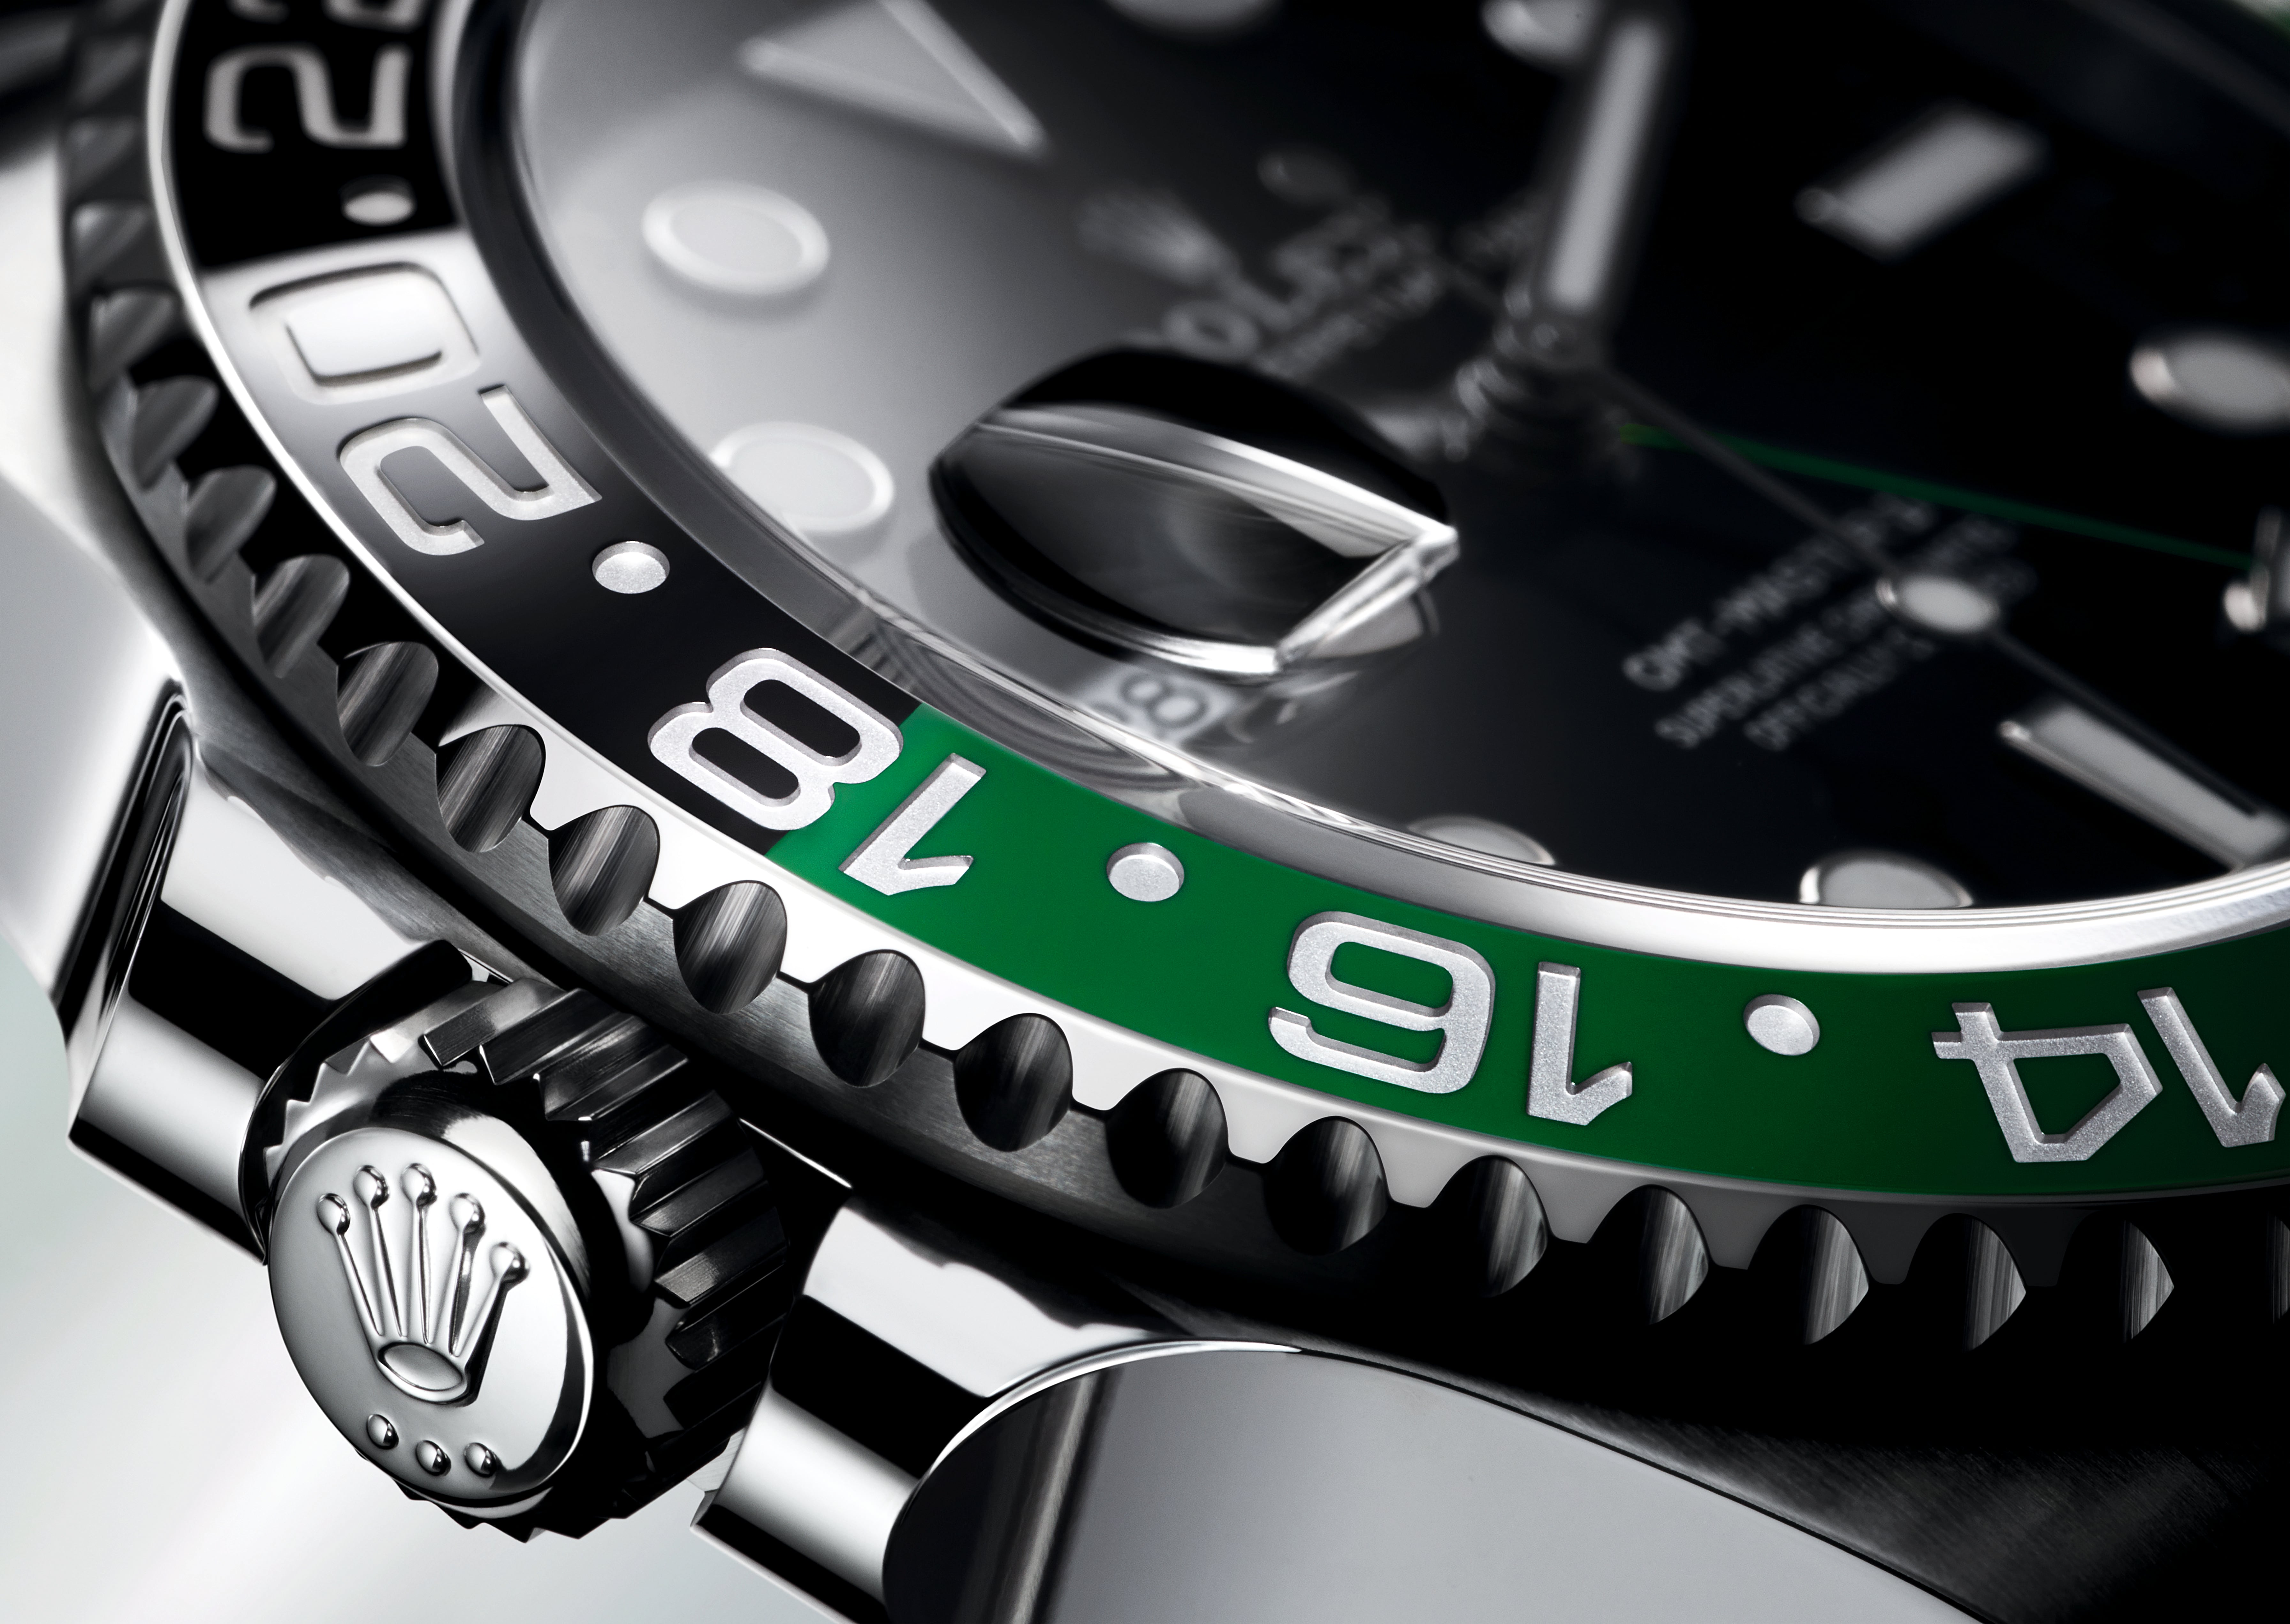 G.O.A.T: The Rolex GMT-Master, Watches